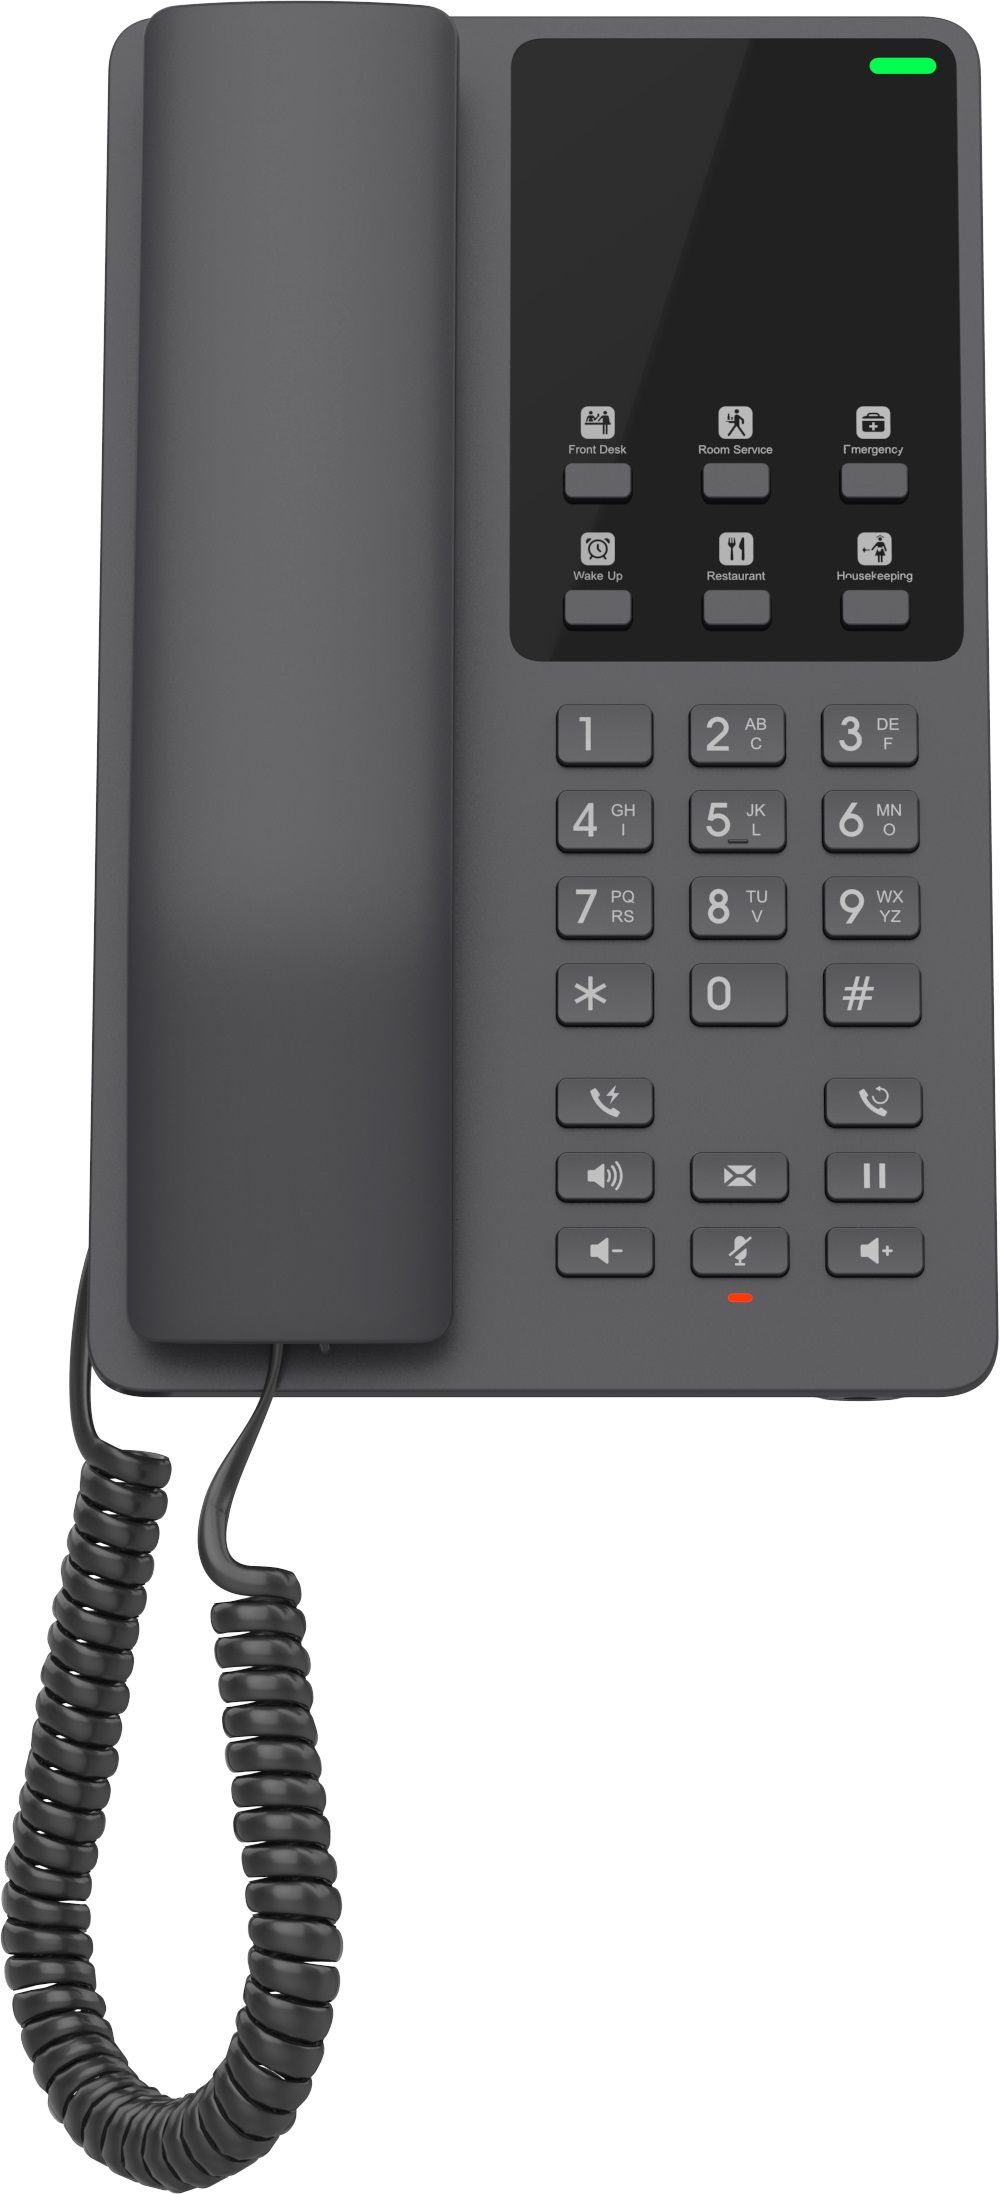 Grandstream GHP621W Hotel Phone with Built-in WiFi - Black (6947273704324) photo